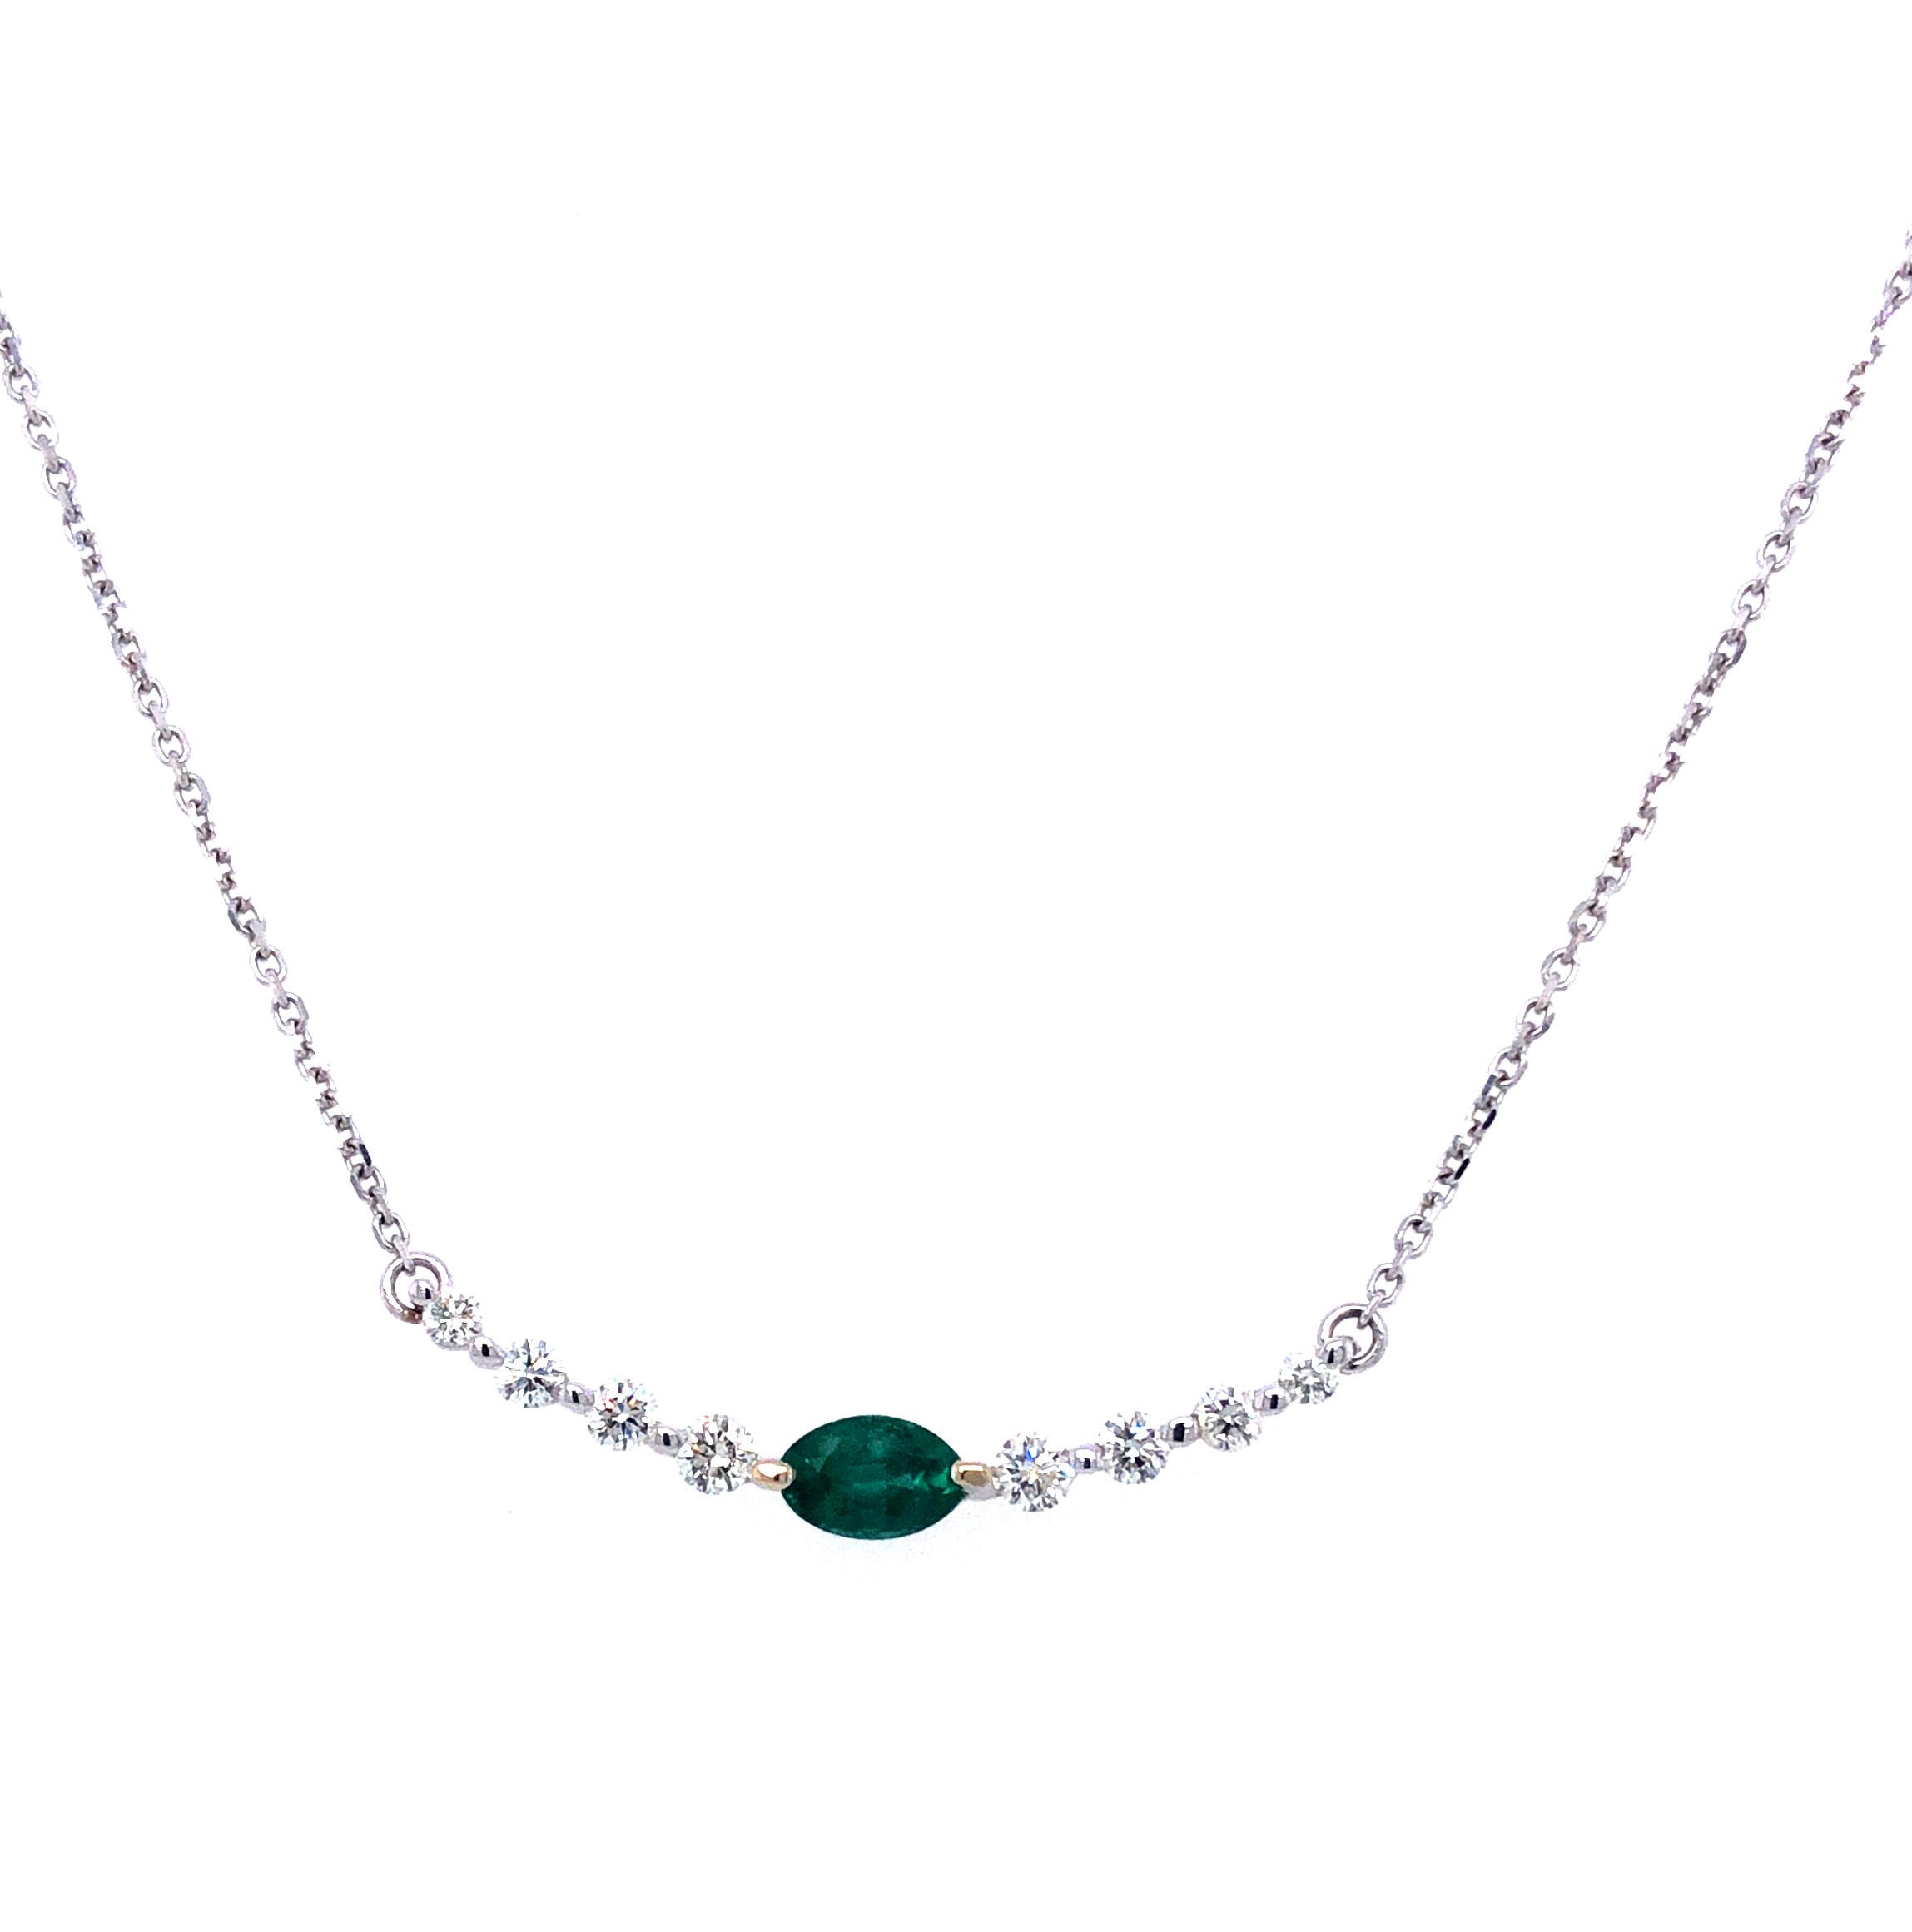 18 Karat White Gold Necklace With 8=0.30TW Round Brilliant G SI Diamonds And One 0.50CT Oval Emerald Center